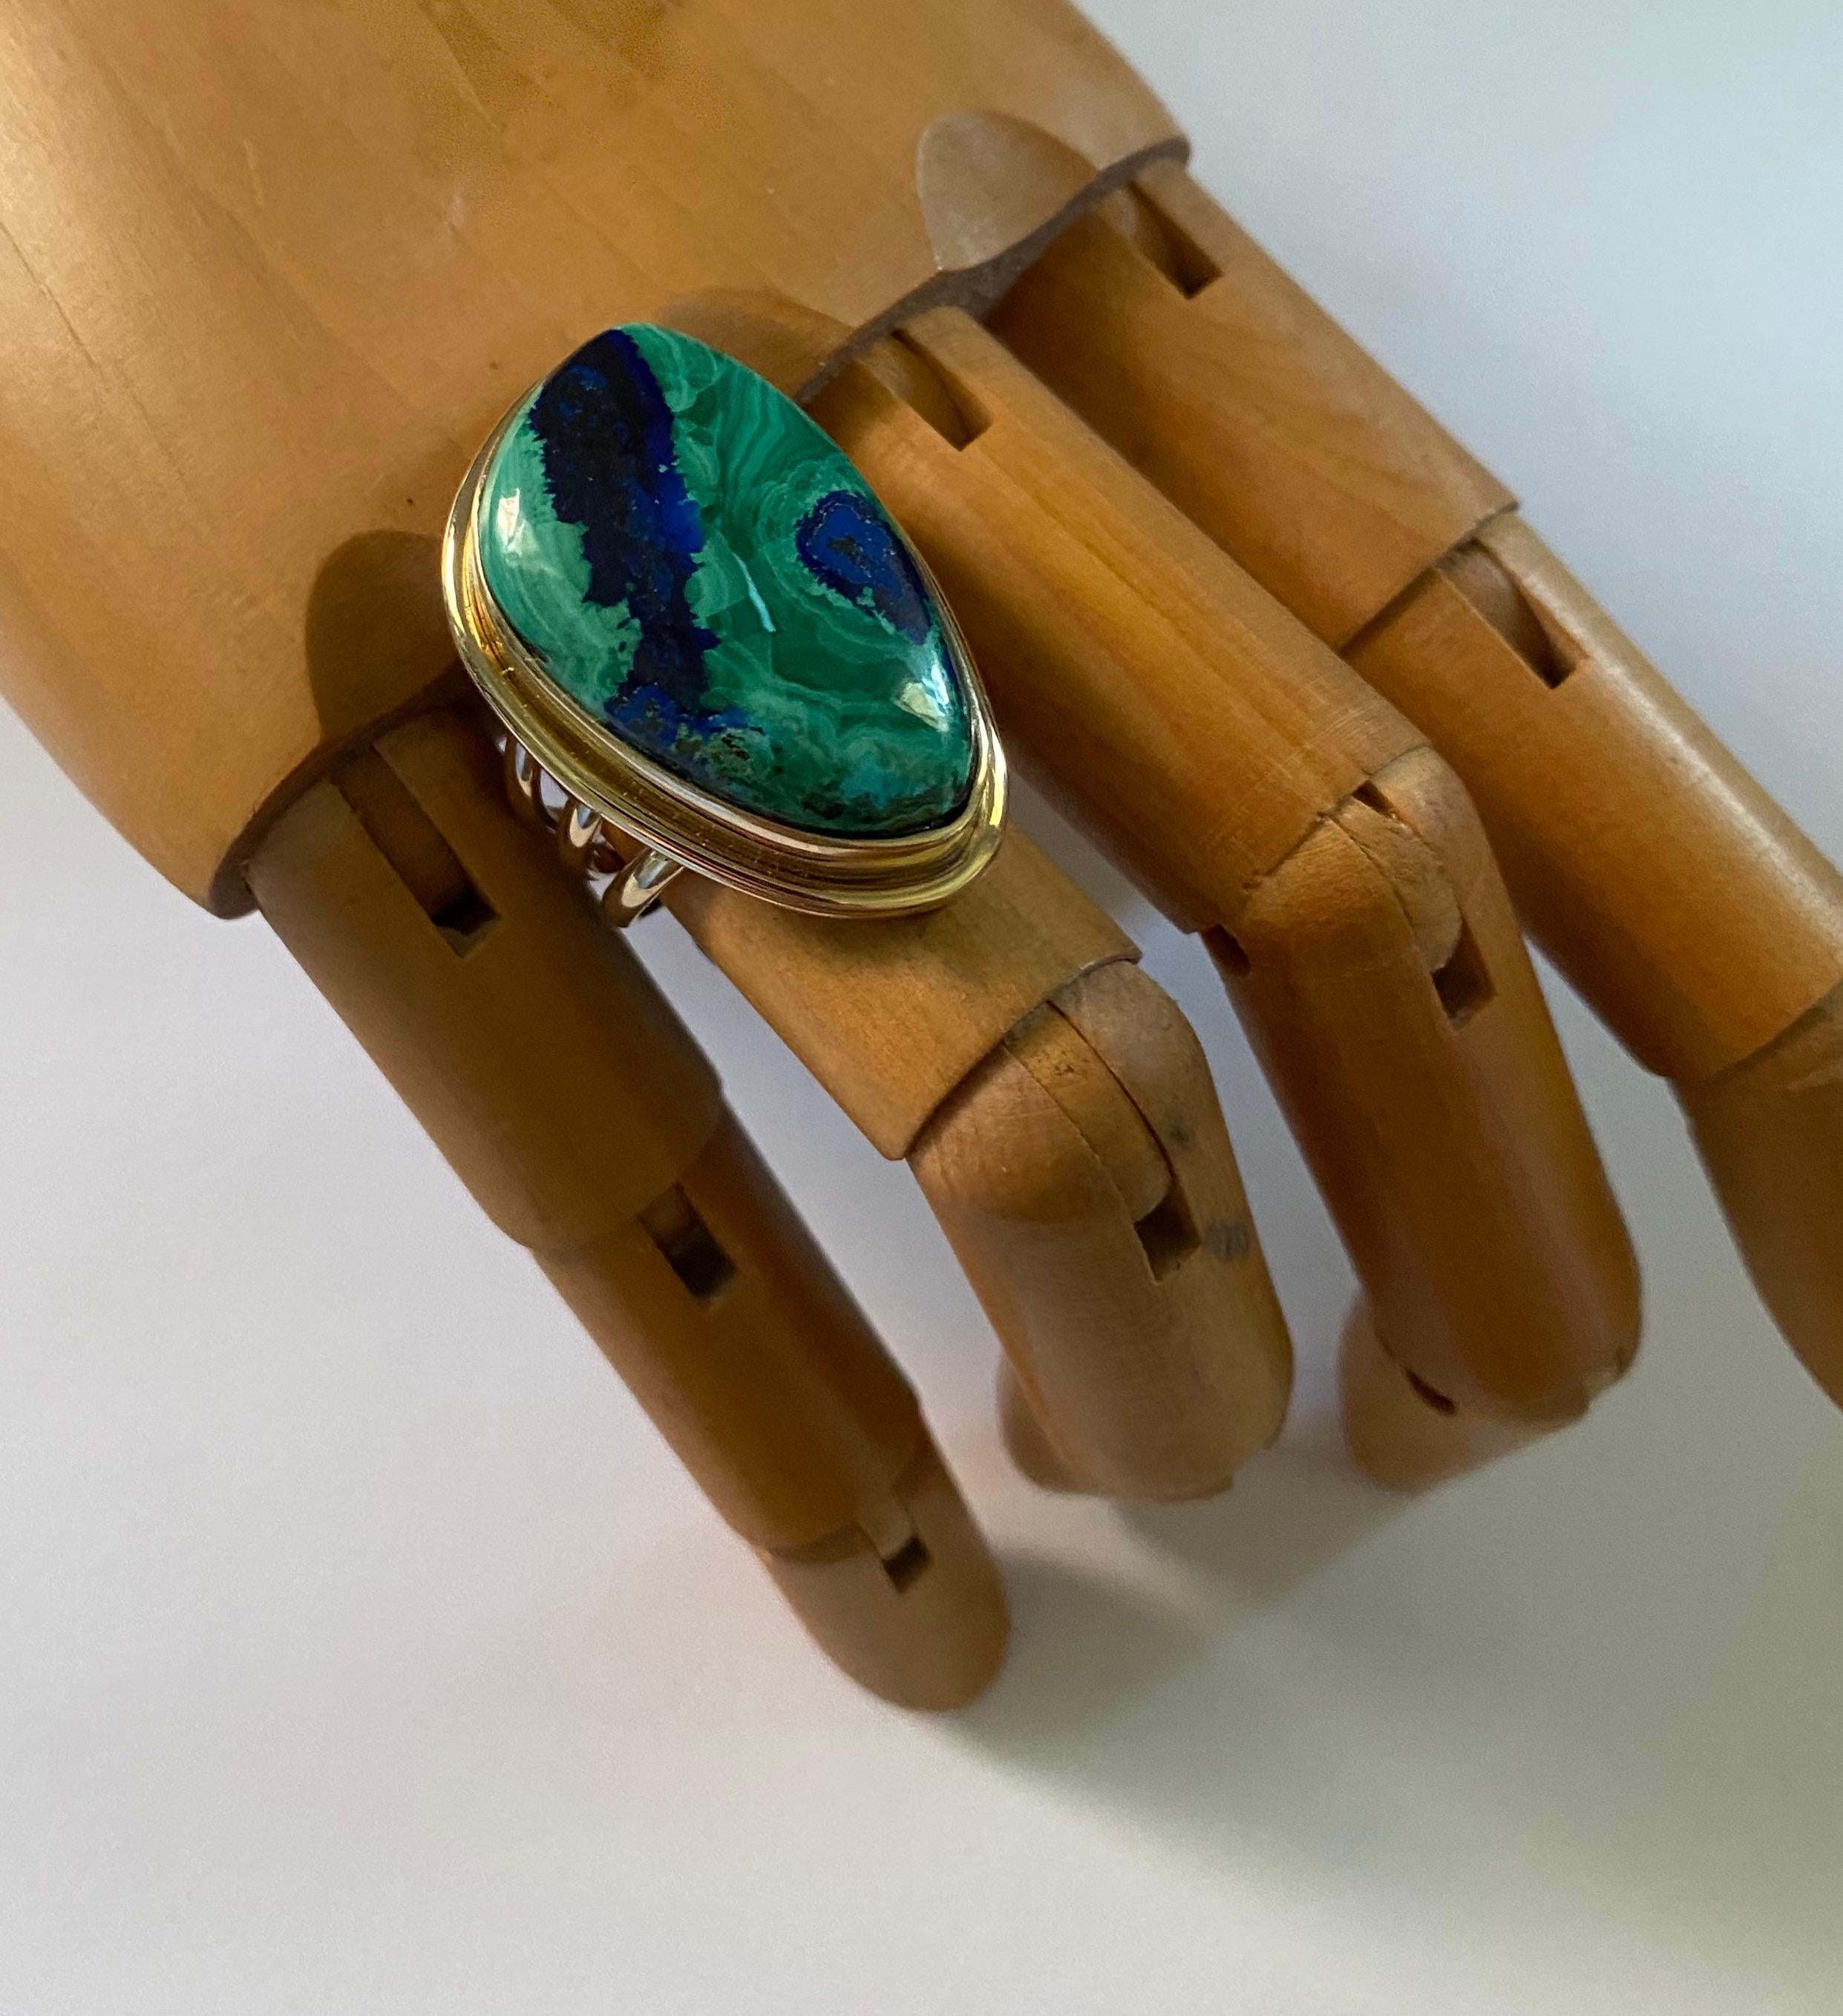 Azurite in malachite is showcased in this archaic style ring.  Sometimes called azurmalachite, this gem comes from Australia.  It is cut in a free-form shape and is polished to a glass-like shine.  The hand fabricated 18k yellow gold ring is